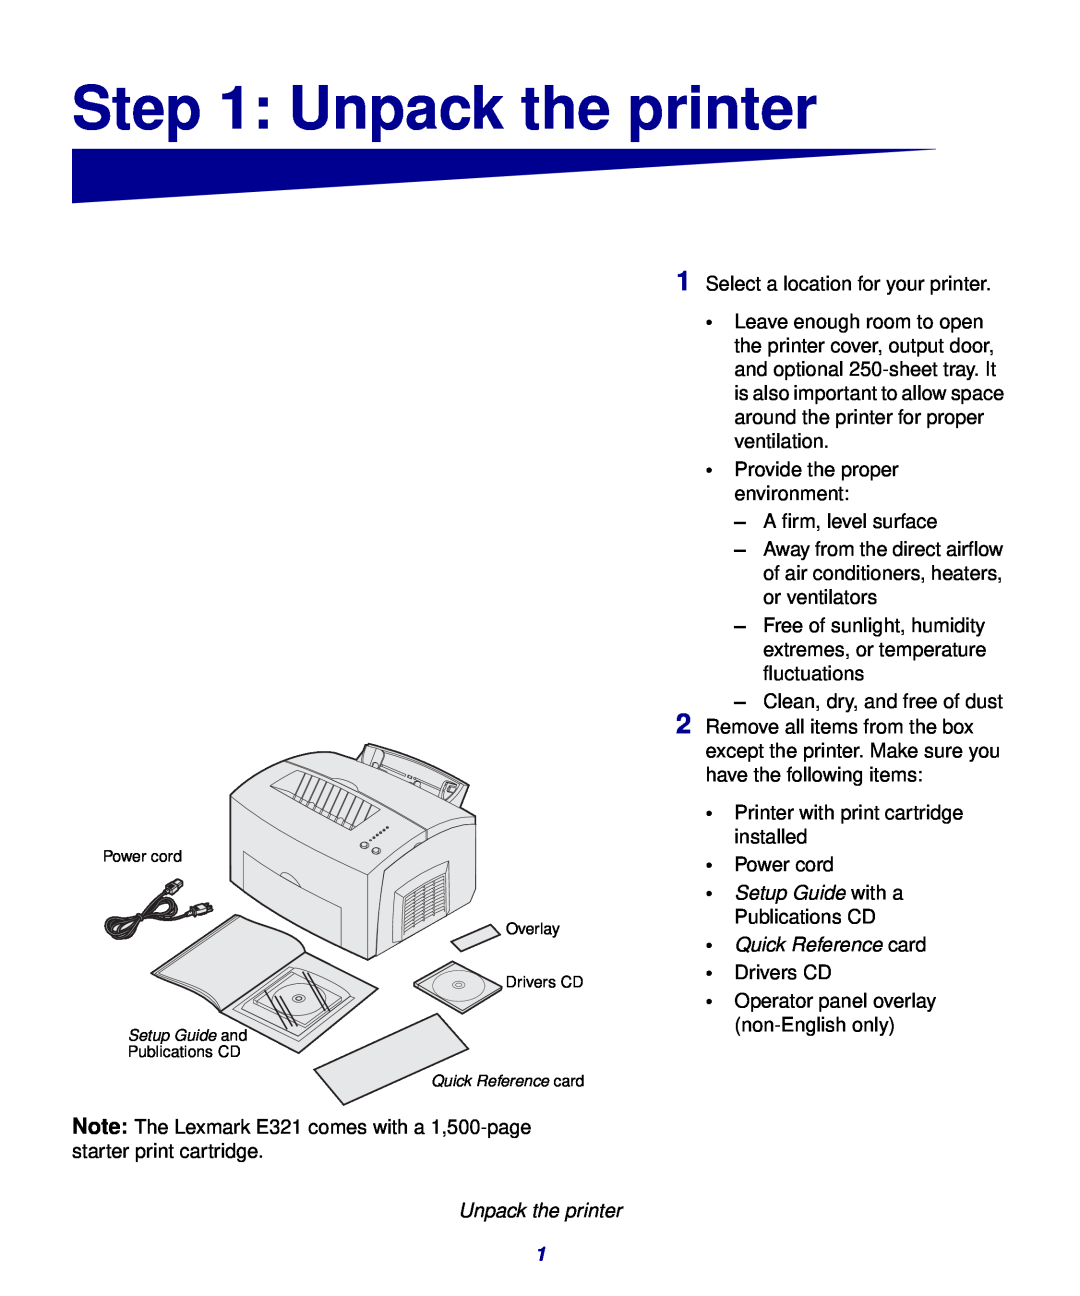 Lexmark 323, 321 setup guide Unpack the printer, •Setup Guide with a Publications CD, •Quick Reference card 